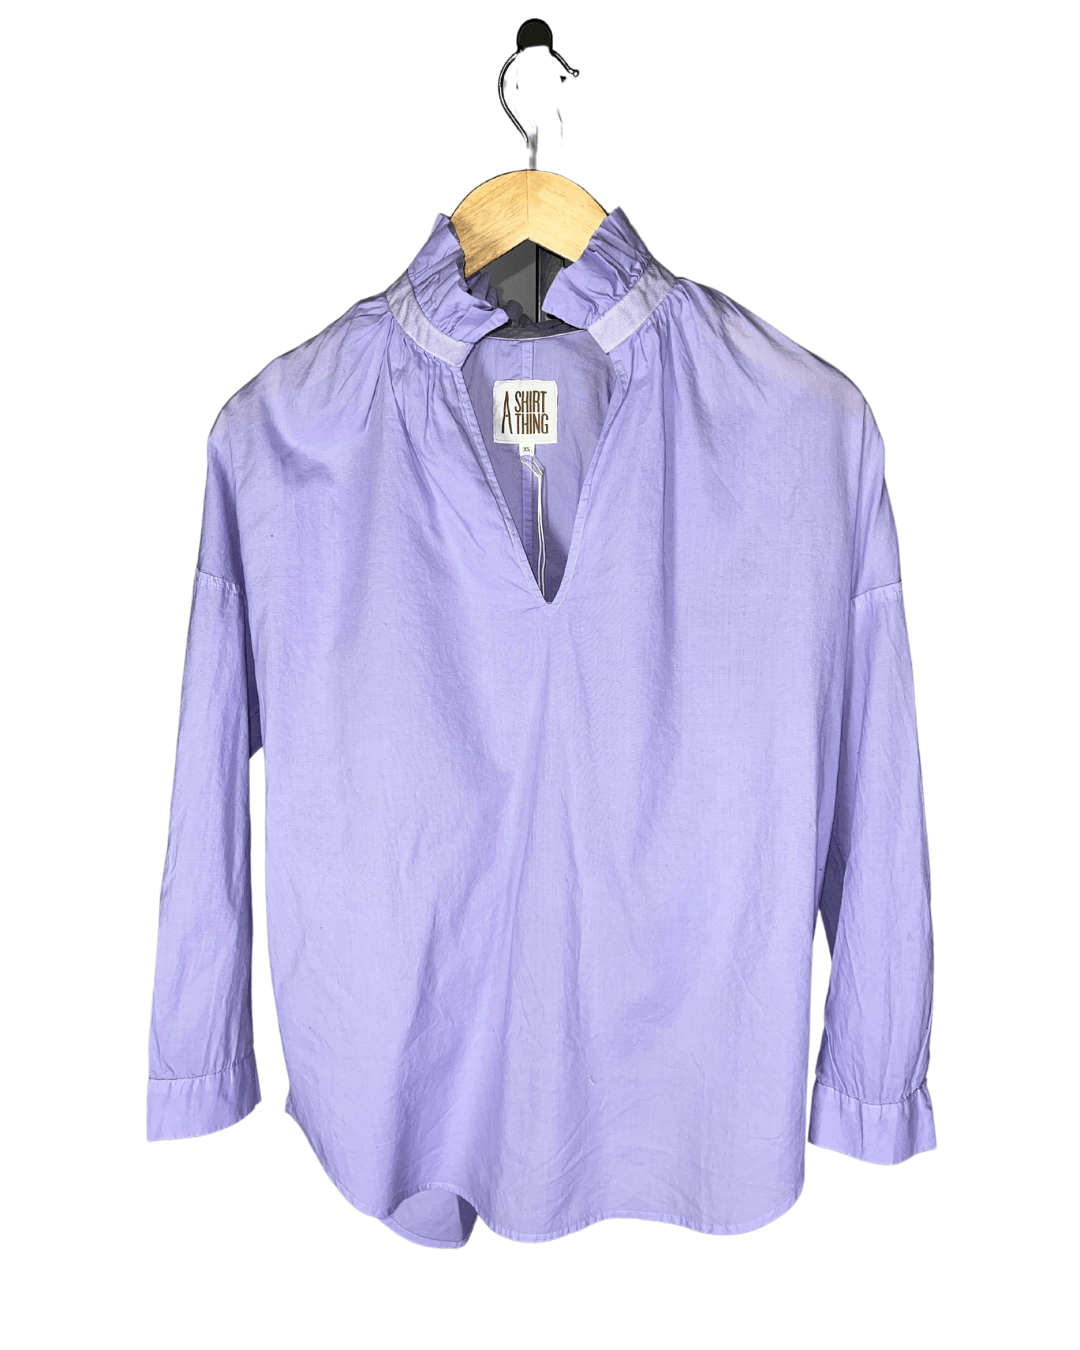 Penelope Cabo Shirt by A Shirt Thing (Various Colors) - Haven